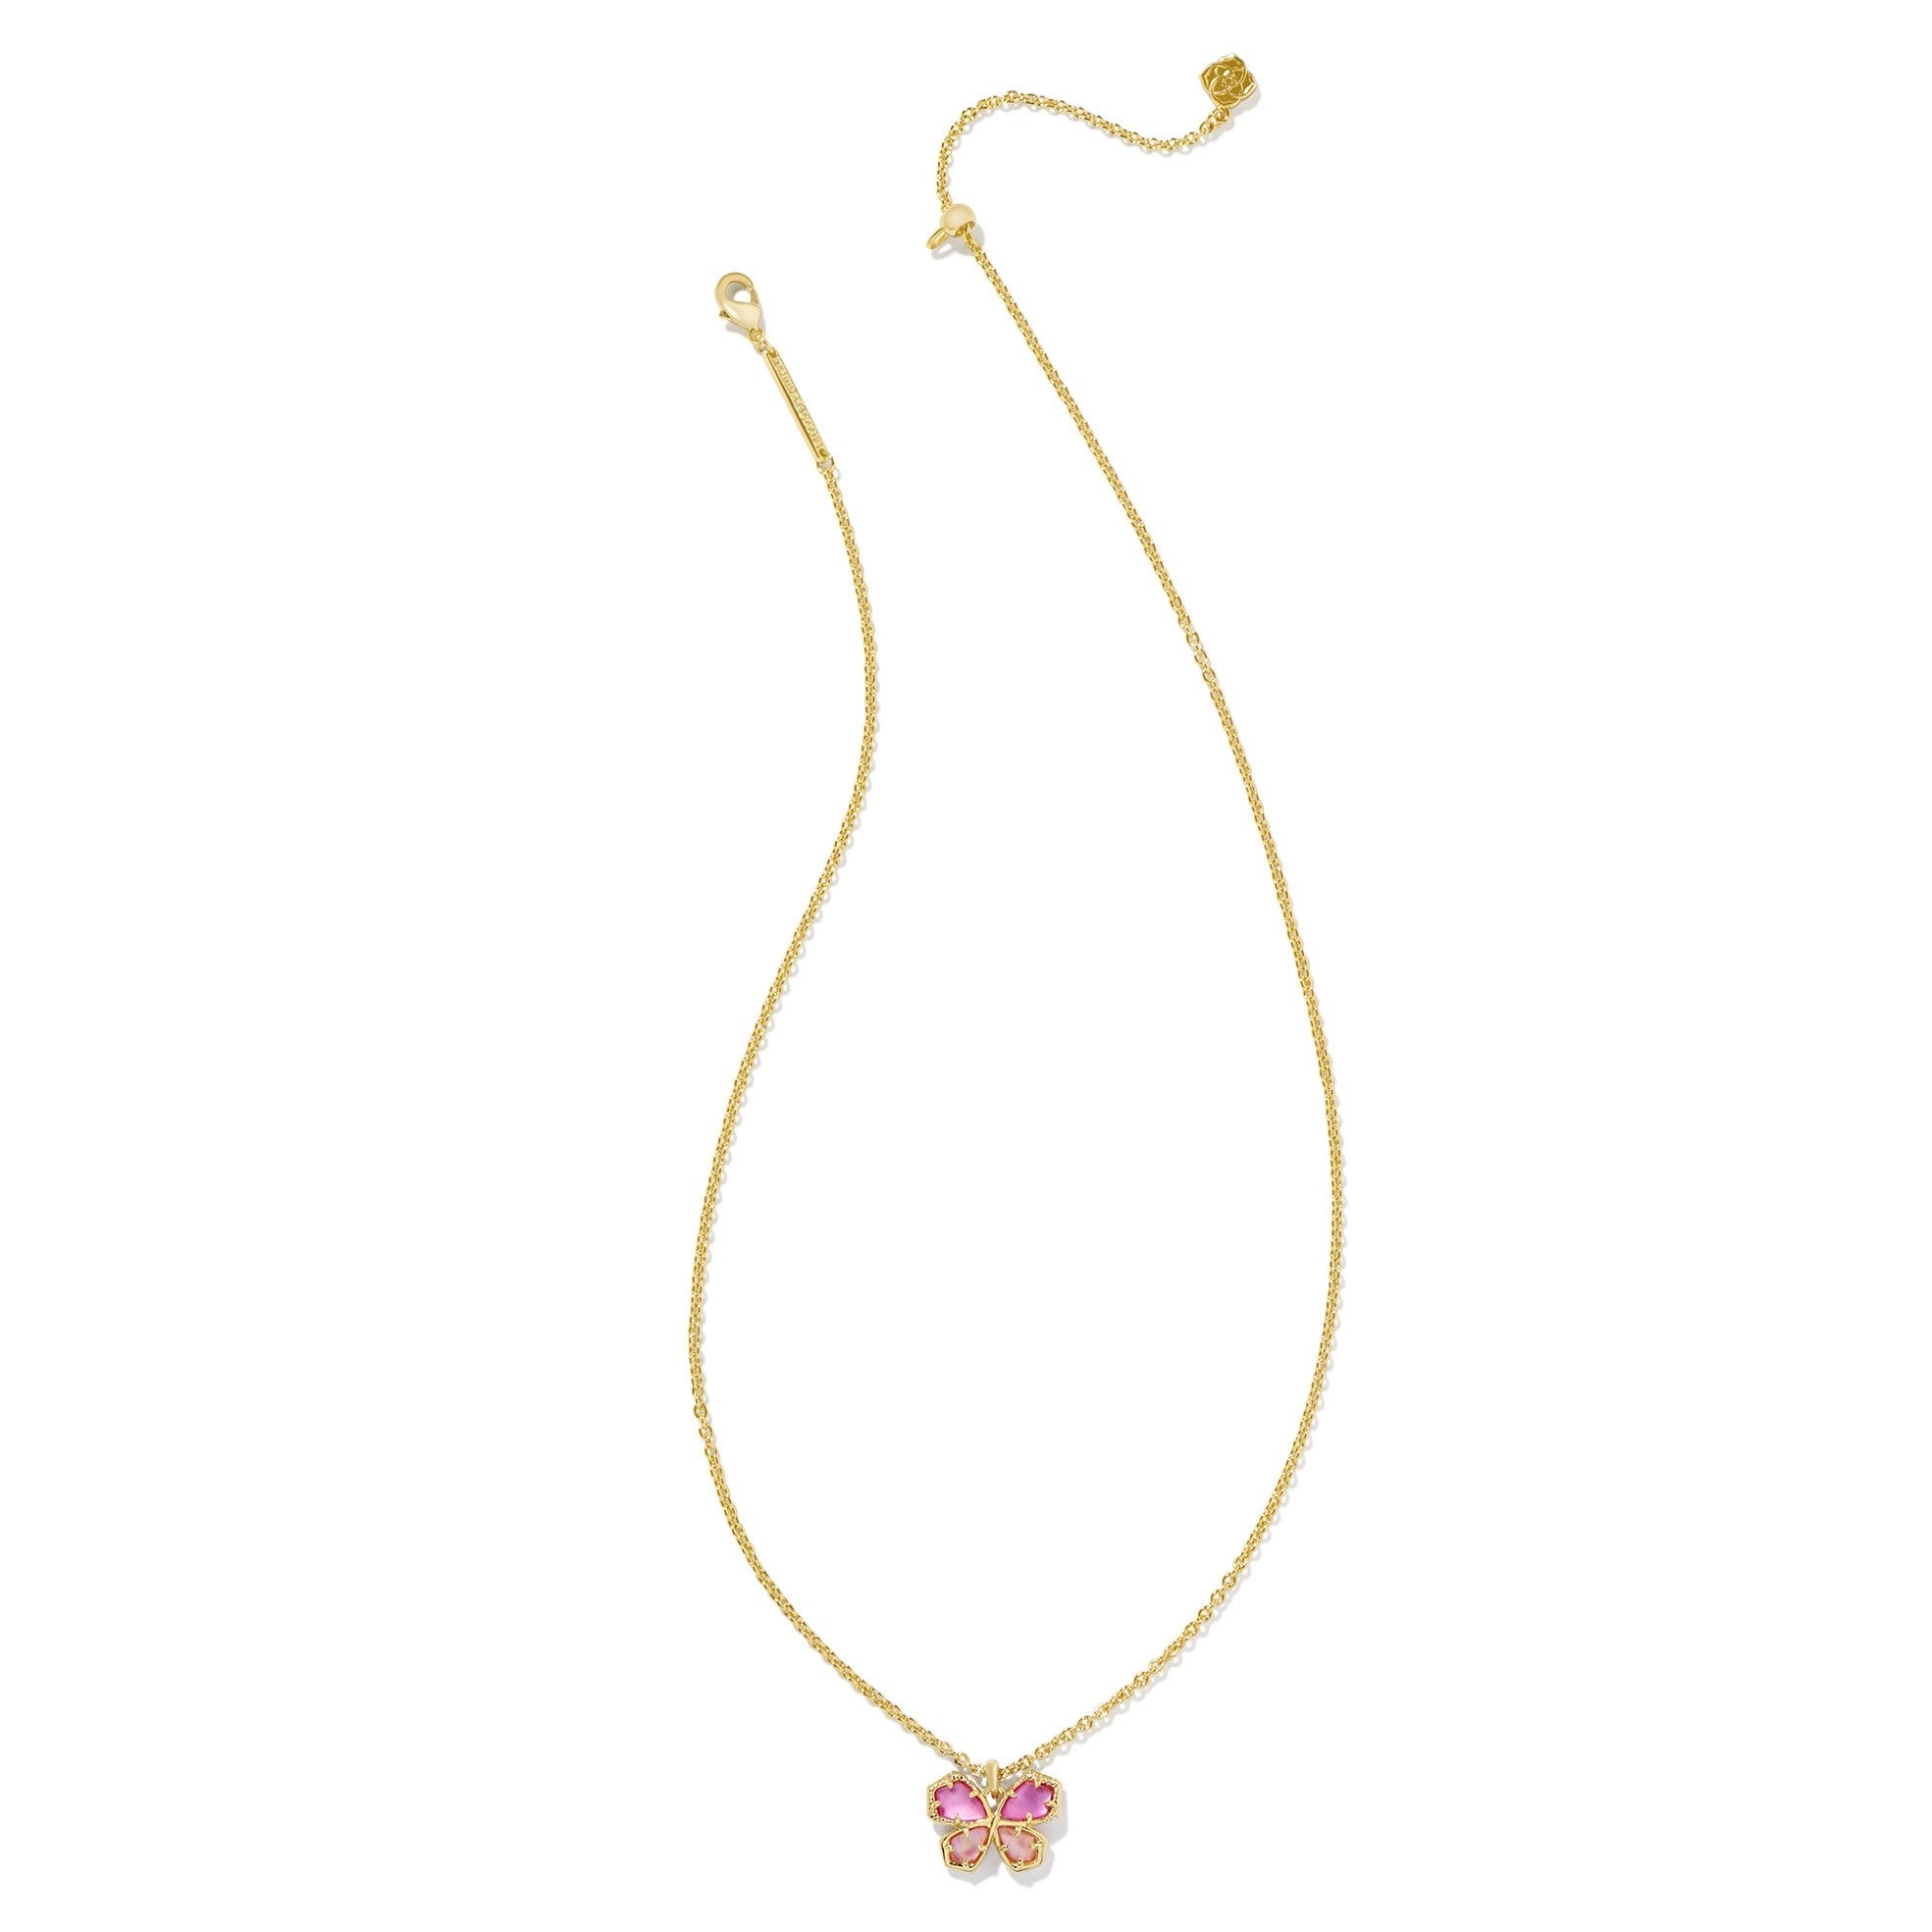 Kendra Scott | Mae Gold Butterfly Short Pendant Necklace in Azalea Illusion - Giddy Up Glamour Boutique